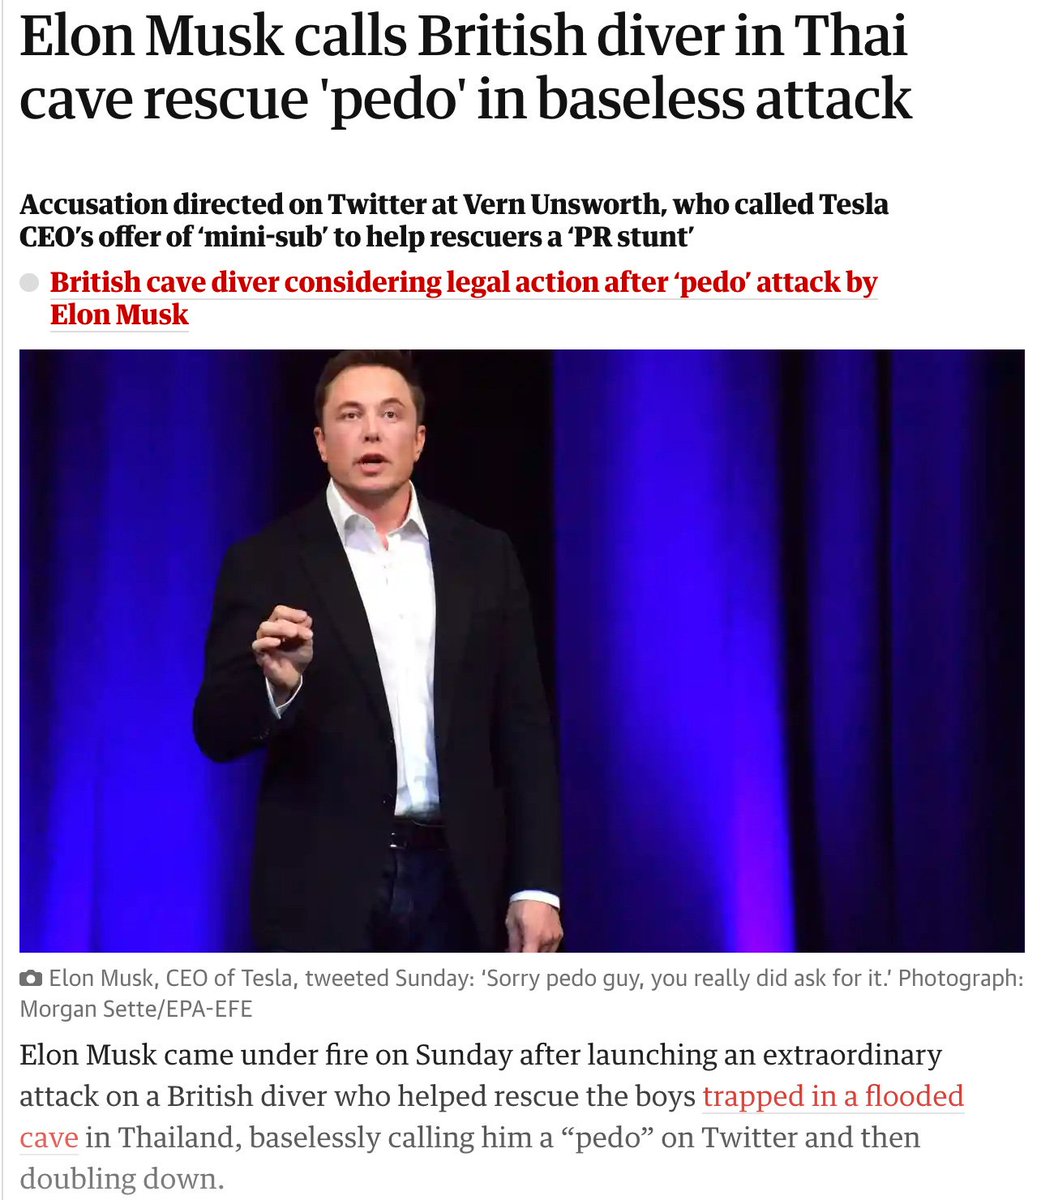 Elon (together with @DavidSacks) is again trying to be an expert on absolutely everything. Back in 2018, he came up with a ridiculous plan to use a 'mini-sub' to rescue children from an underwater cave. Then he called the rescue diver who called the plan a PR stunt a 'pedo guy'.